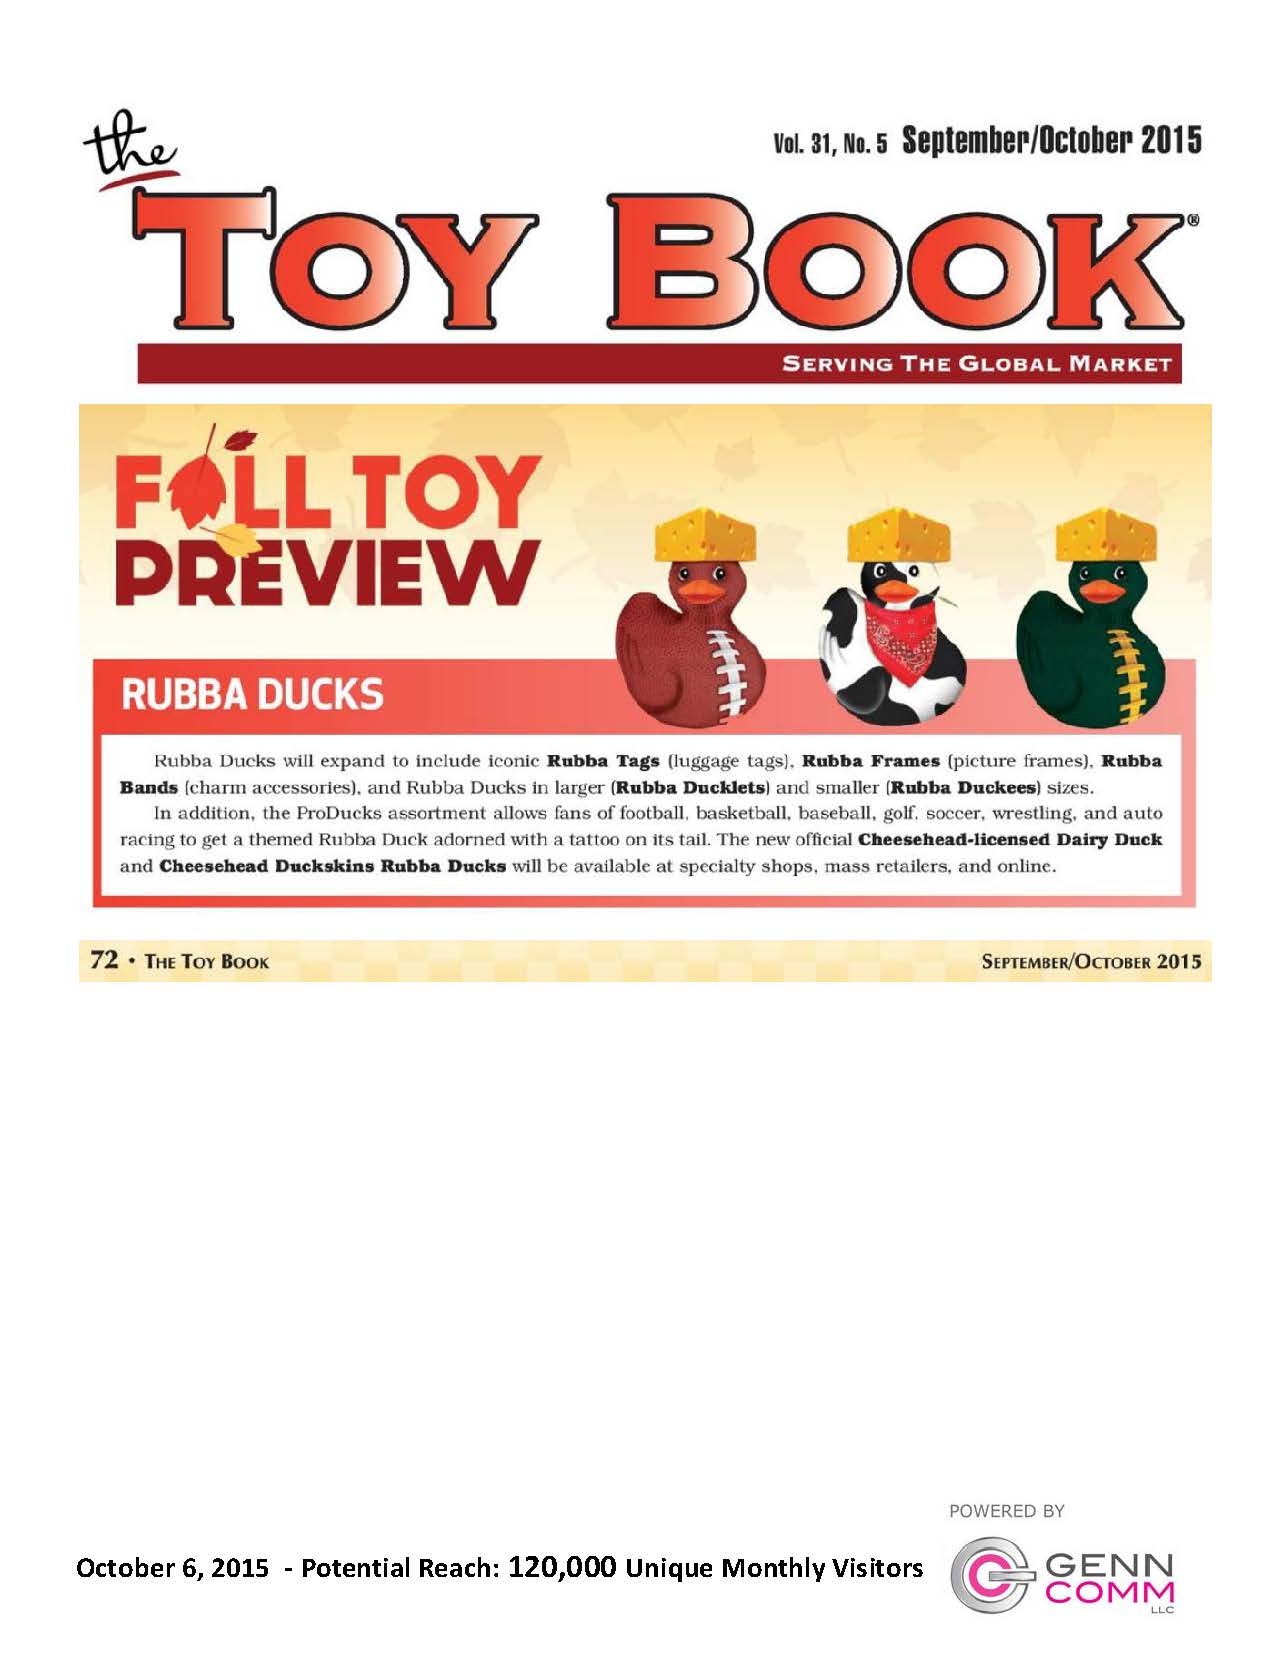 The Toy Book Fall Toy Preview; Rubba Ducks Rubba Ducks